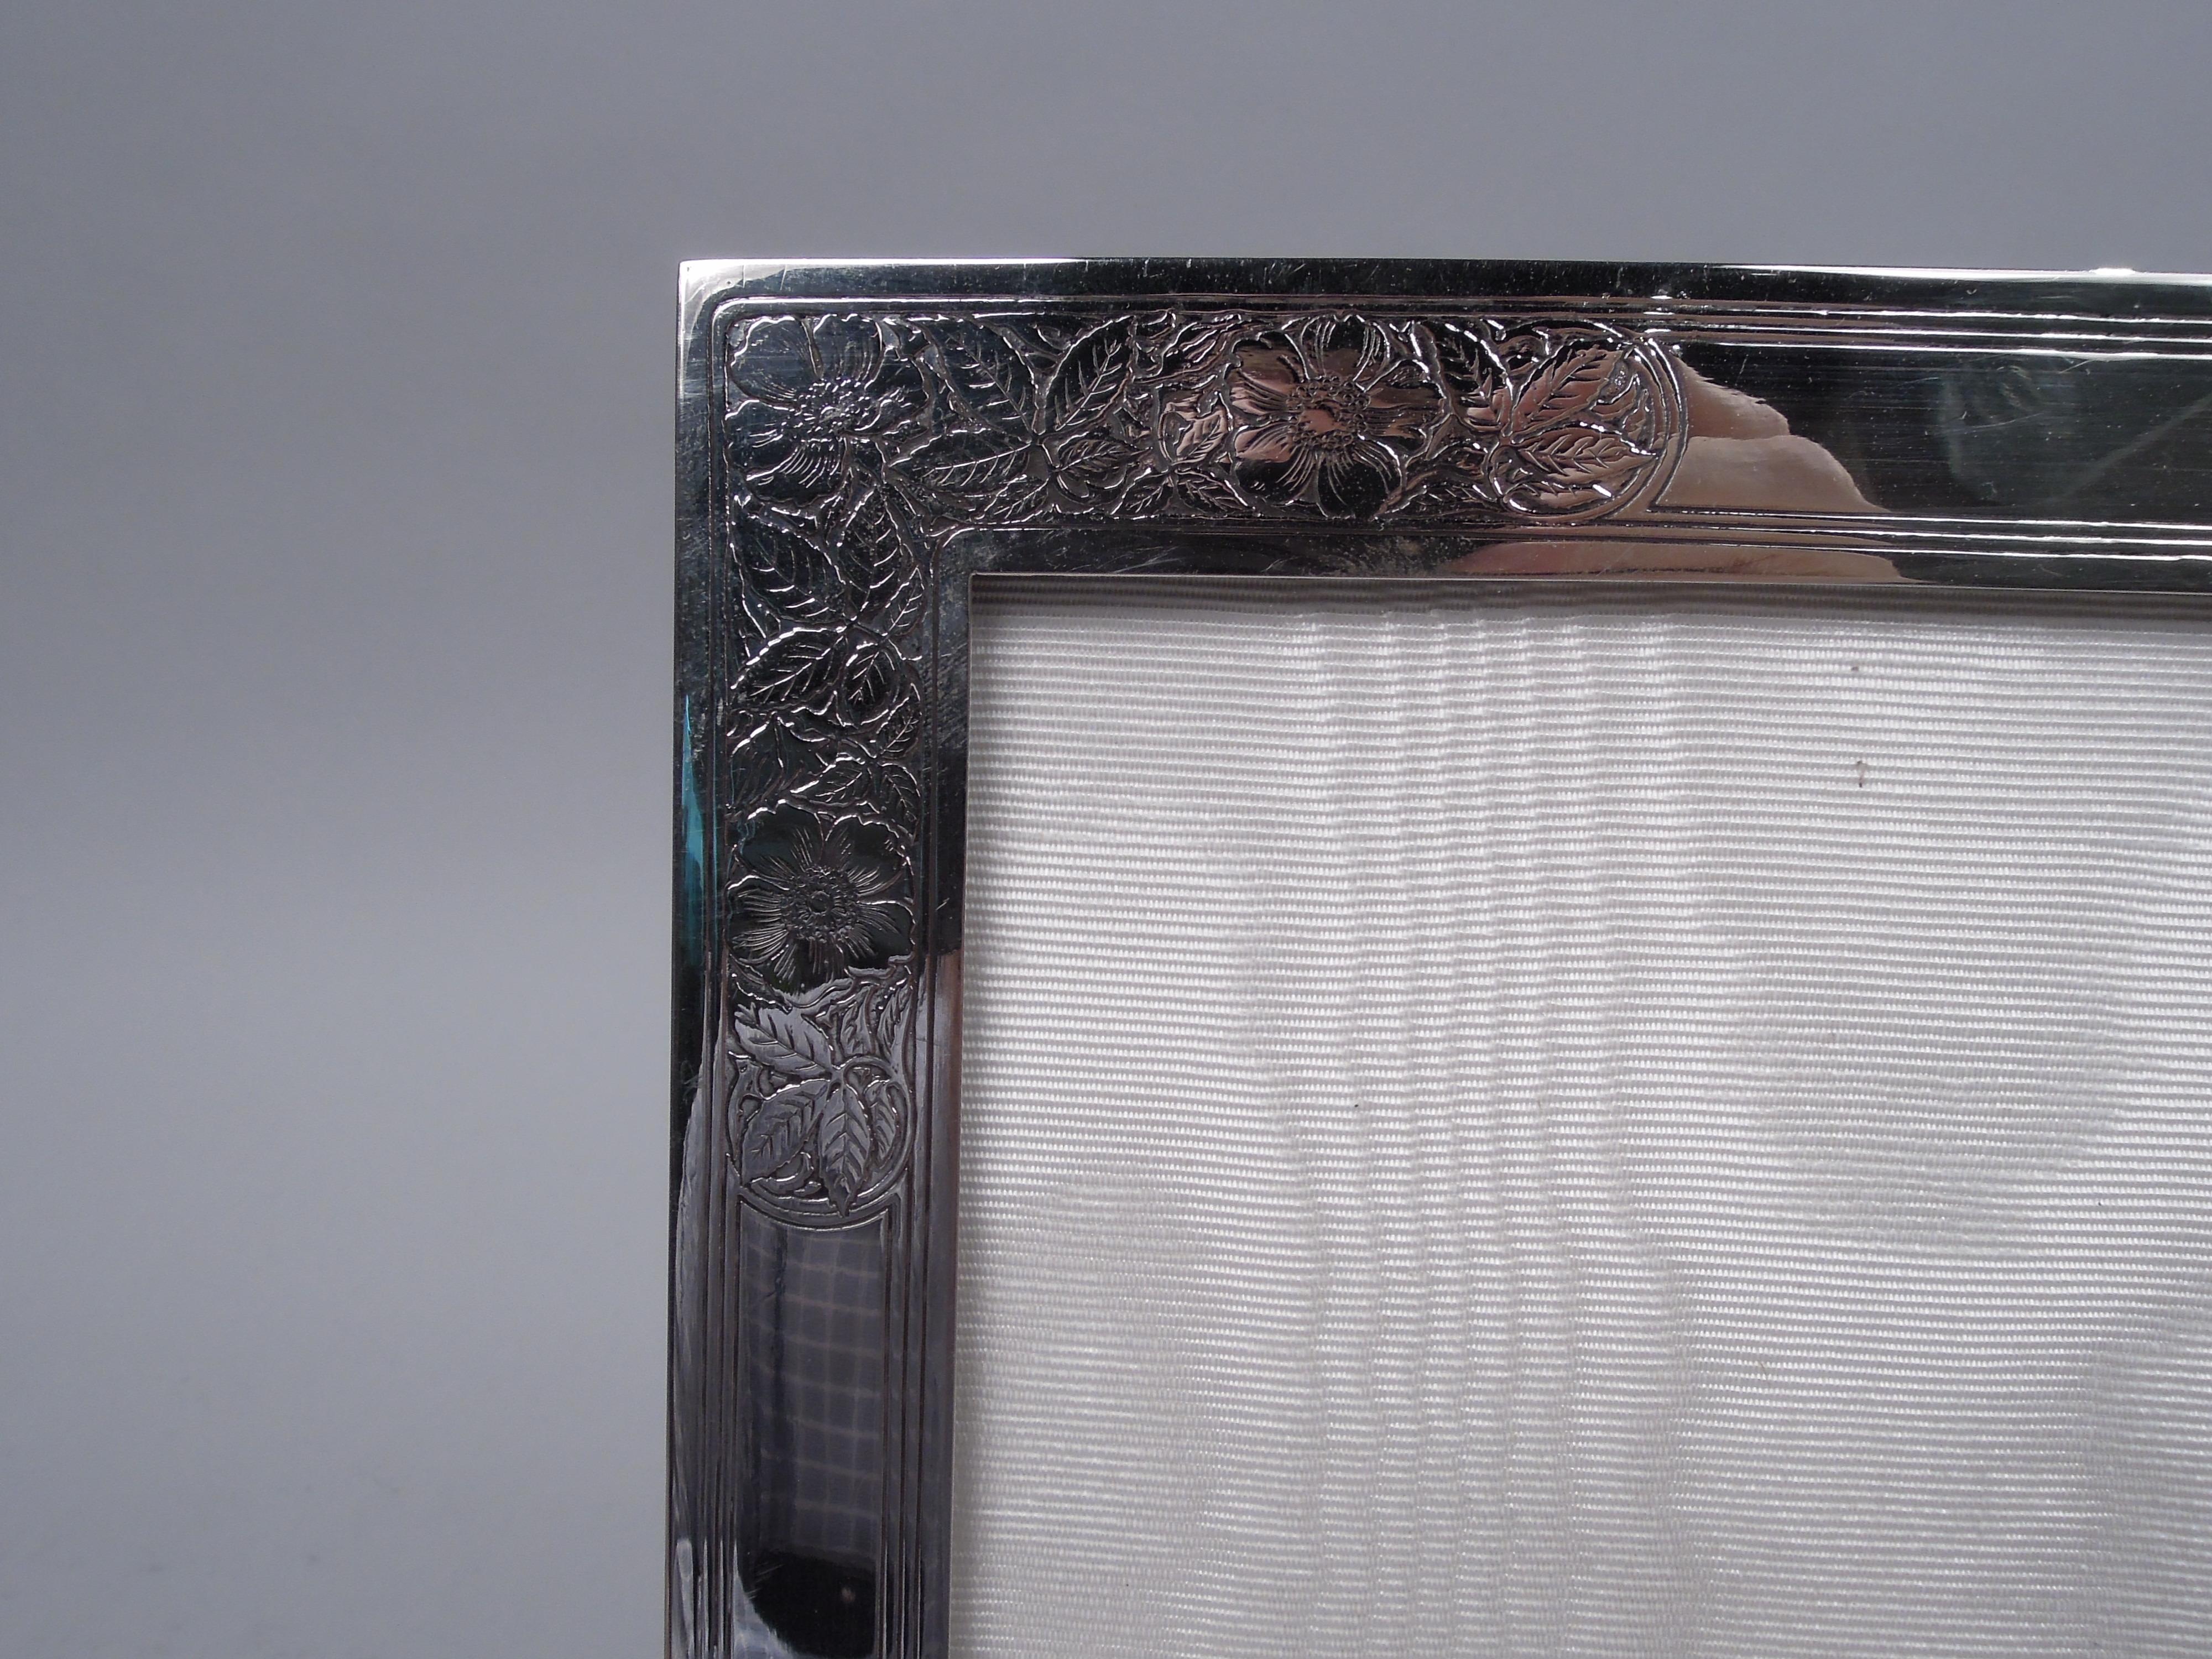 Art Nouveau sterling silver picture frame. Made by Tiffany & Co. in New York, ca 1910. Rectangular window in flat surround. Surround front has acid-etched fronds and flowers alternating with tubular cartouches (vacant). Sides have tooled rectilinear